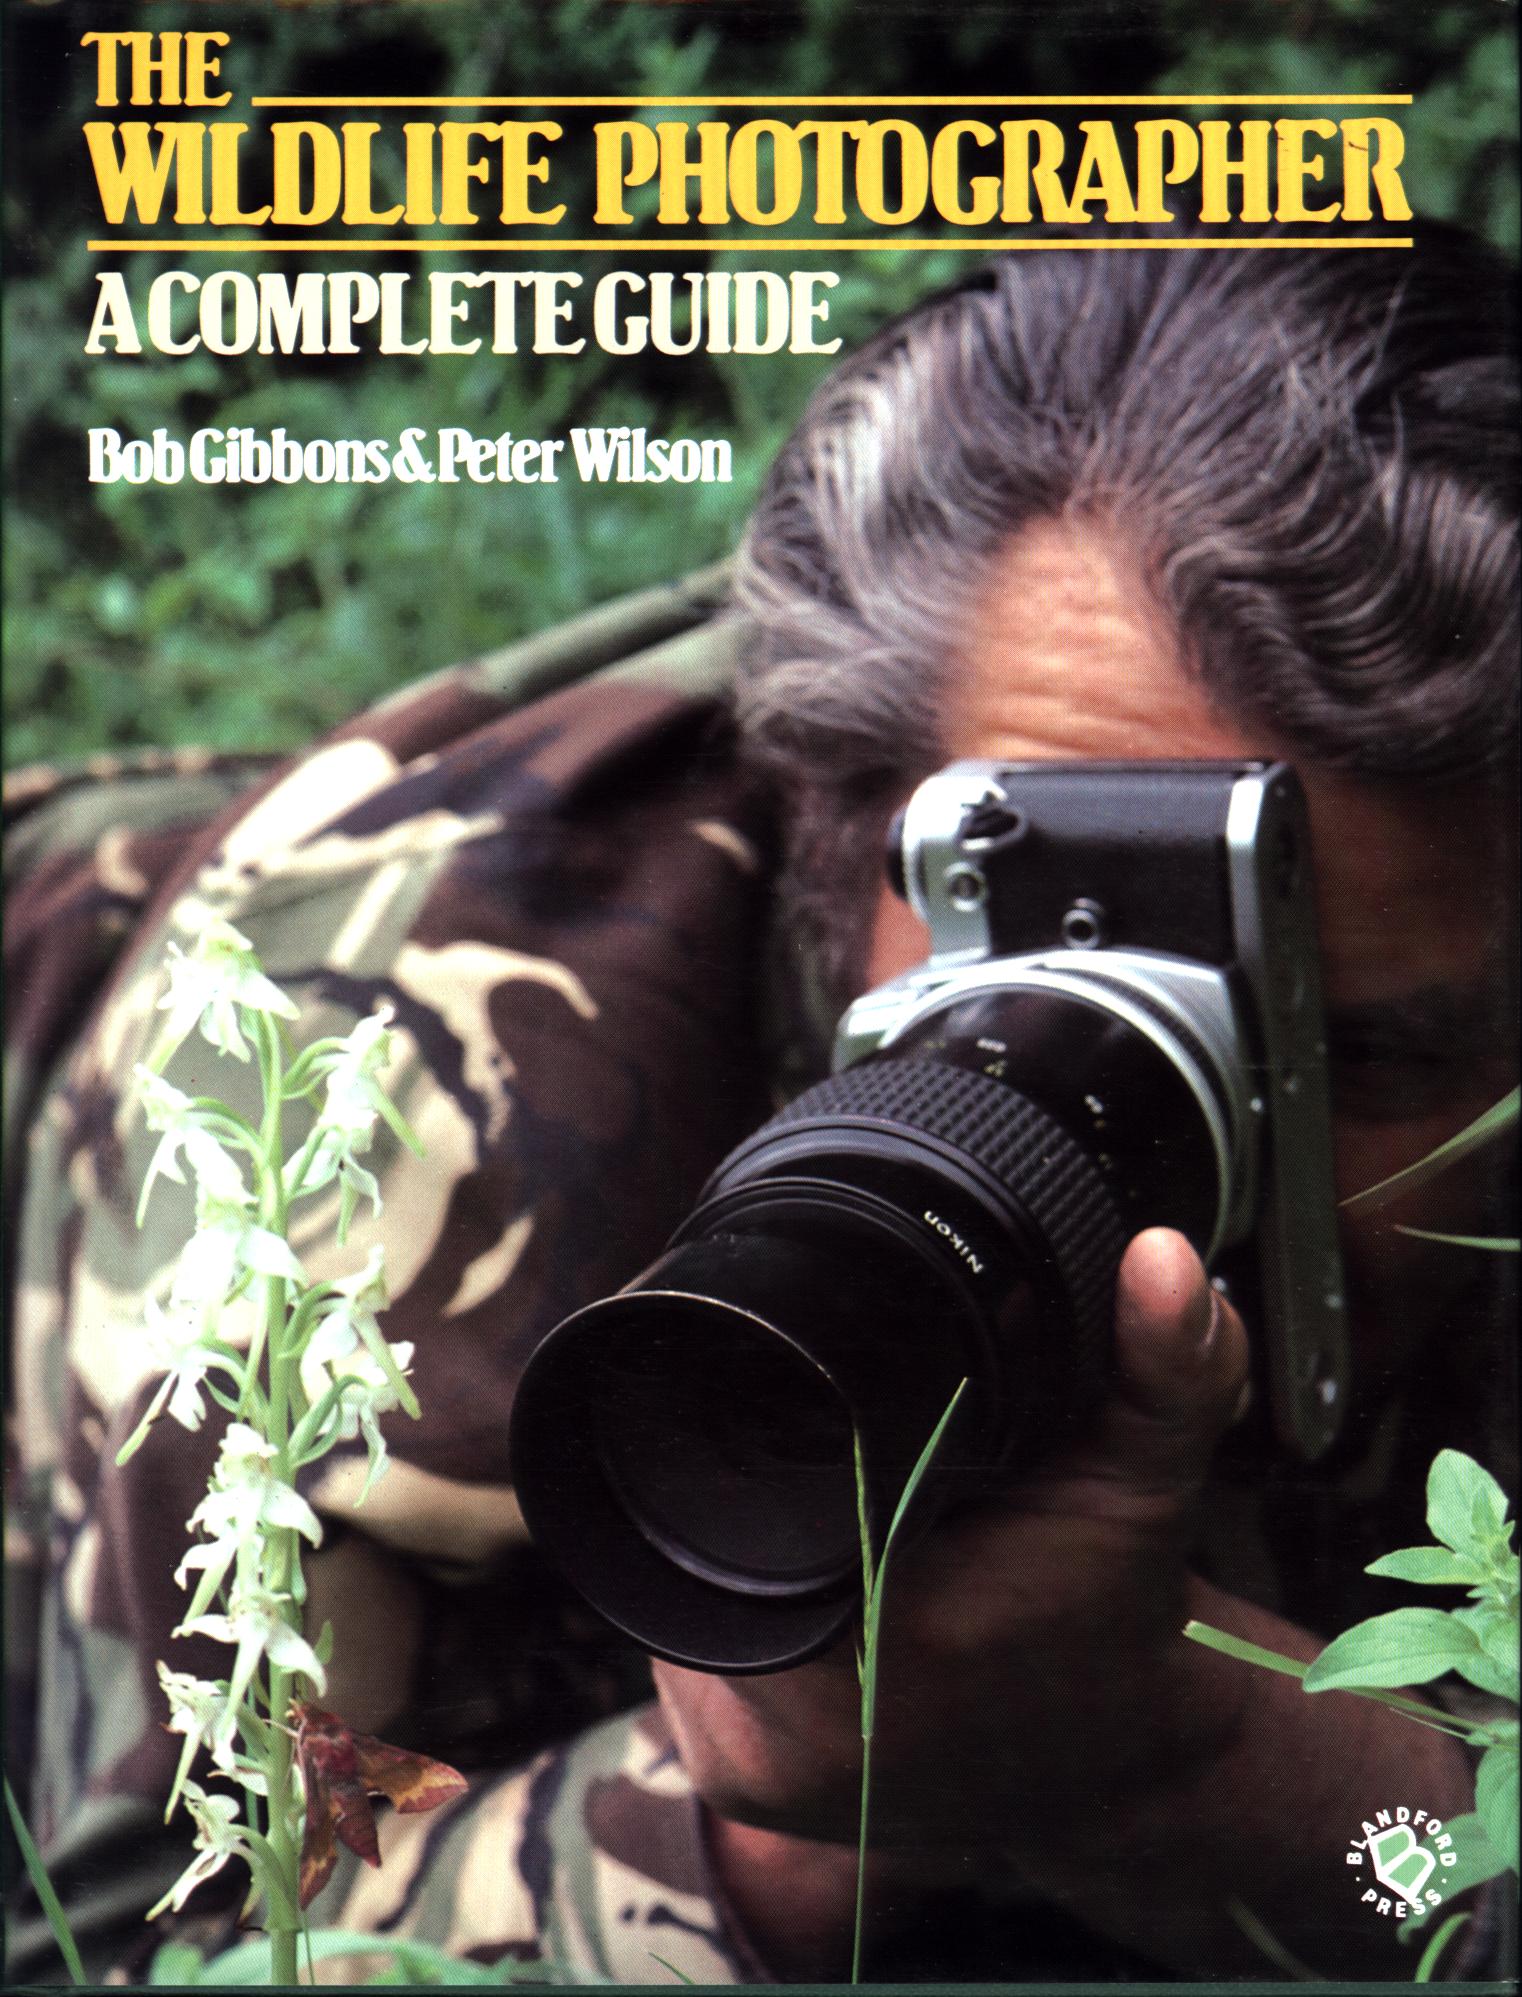 THE WILDLIFE PHOTOGRAPHER: a complete guide. 